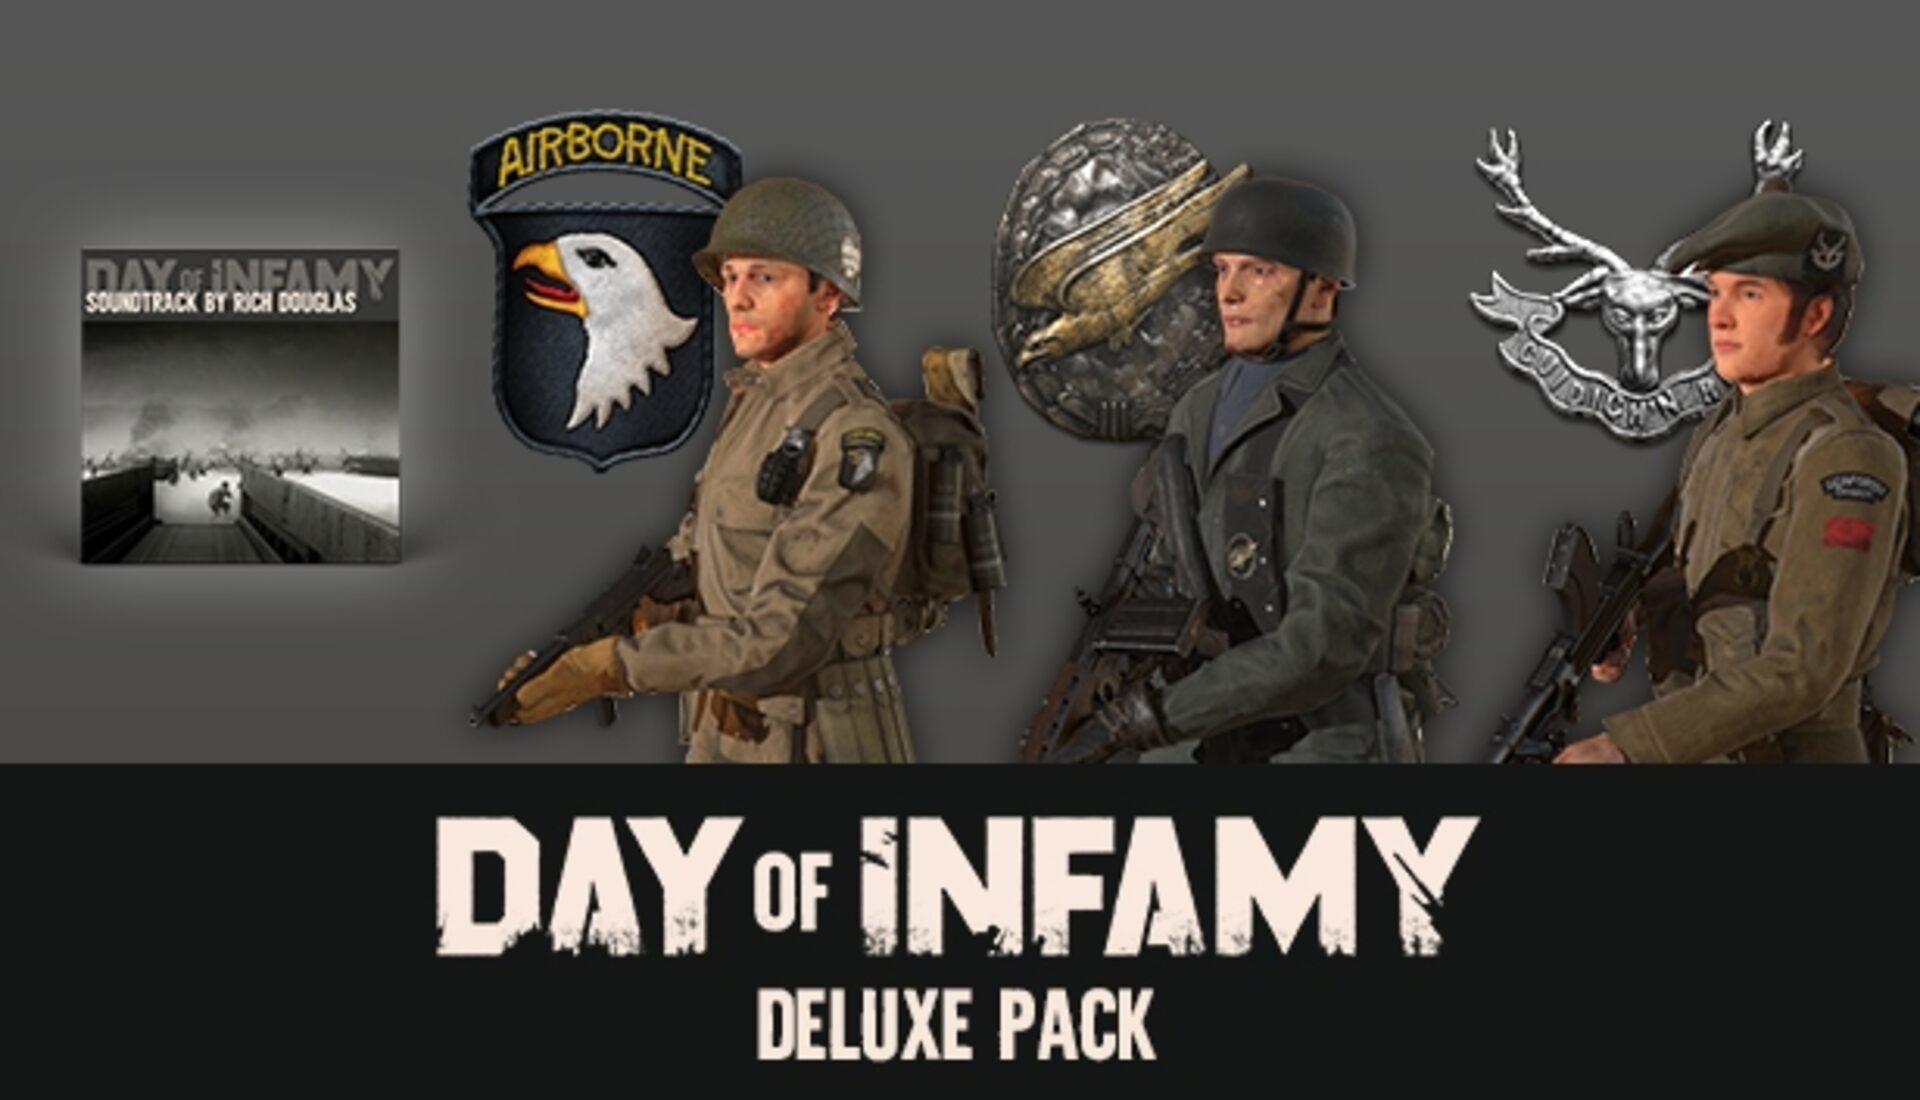 day of infamy wallpaper